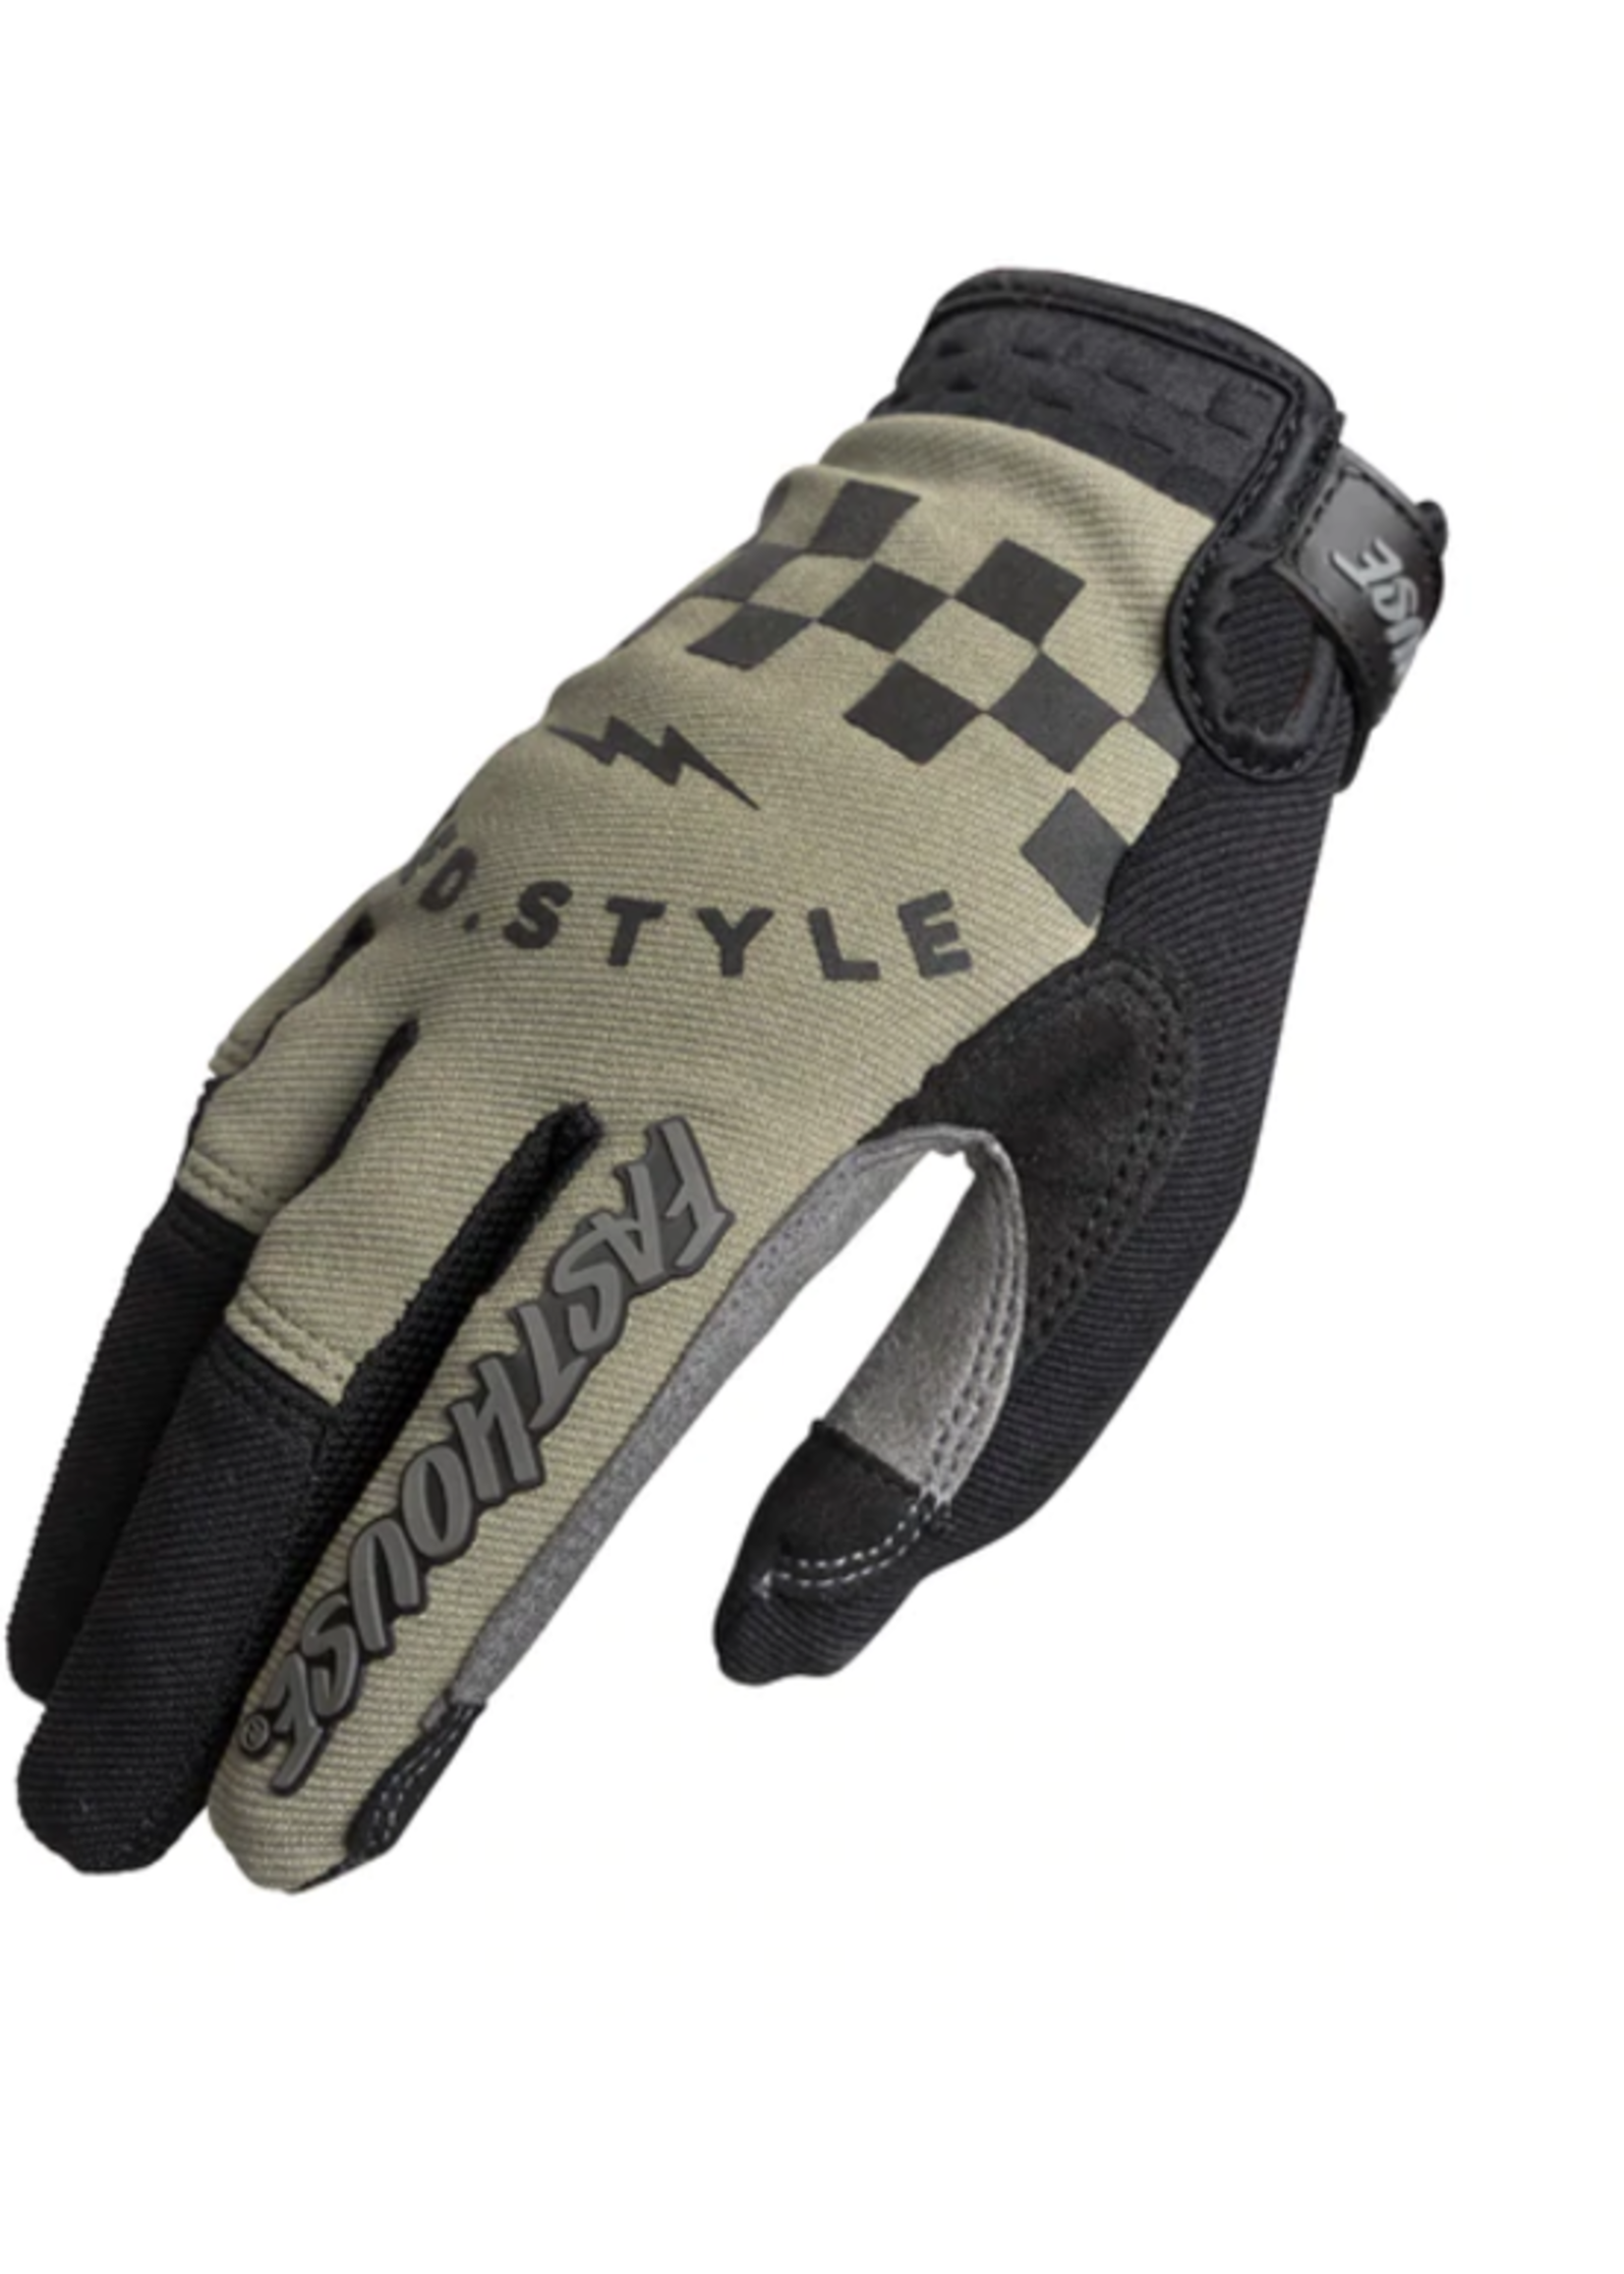 Fasthouse FastHouse- Speed Style Rowen Glove,